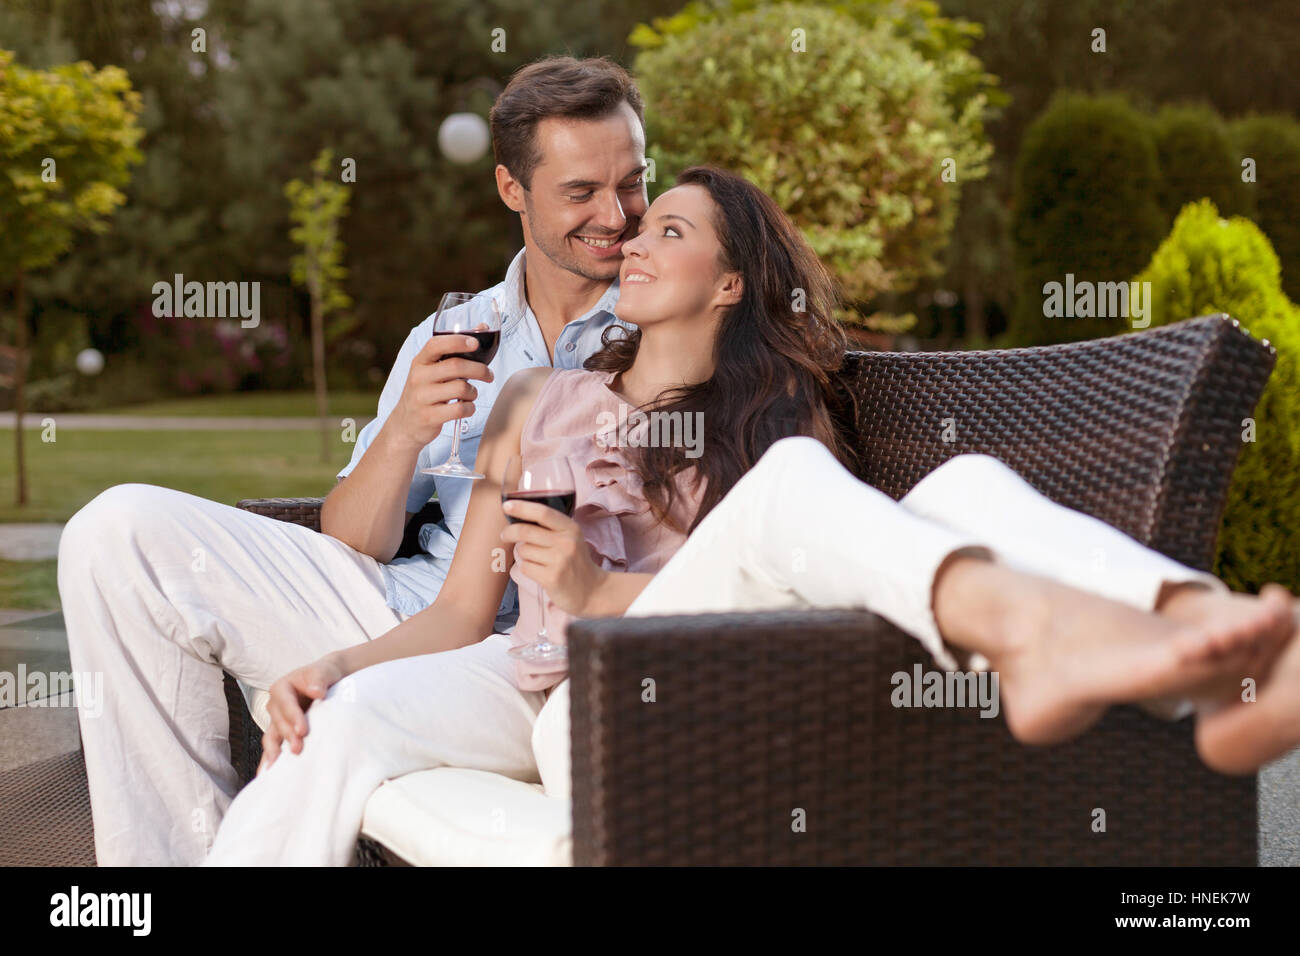 Romantic young holding wine glasses on easy chair in park Stock Photo